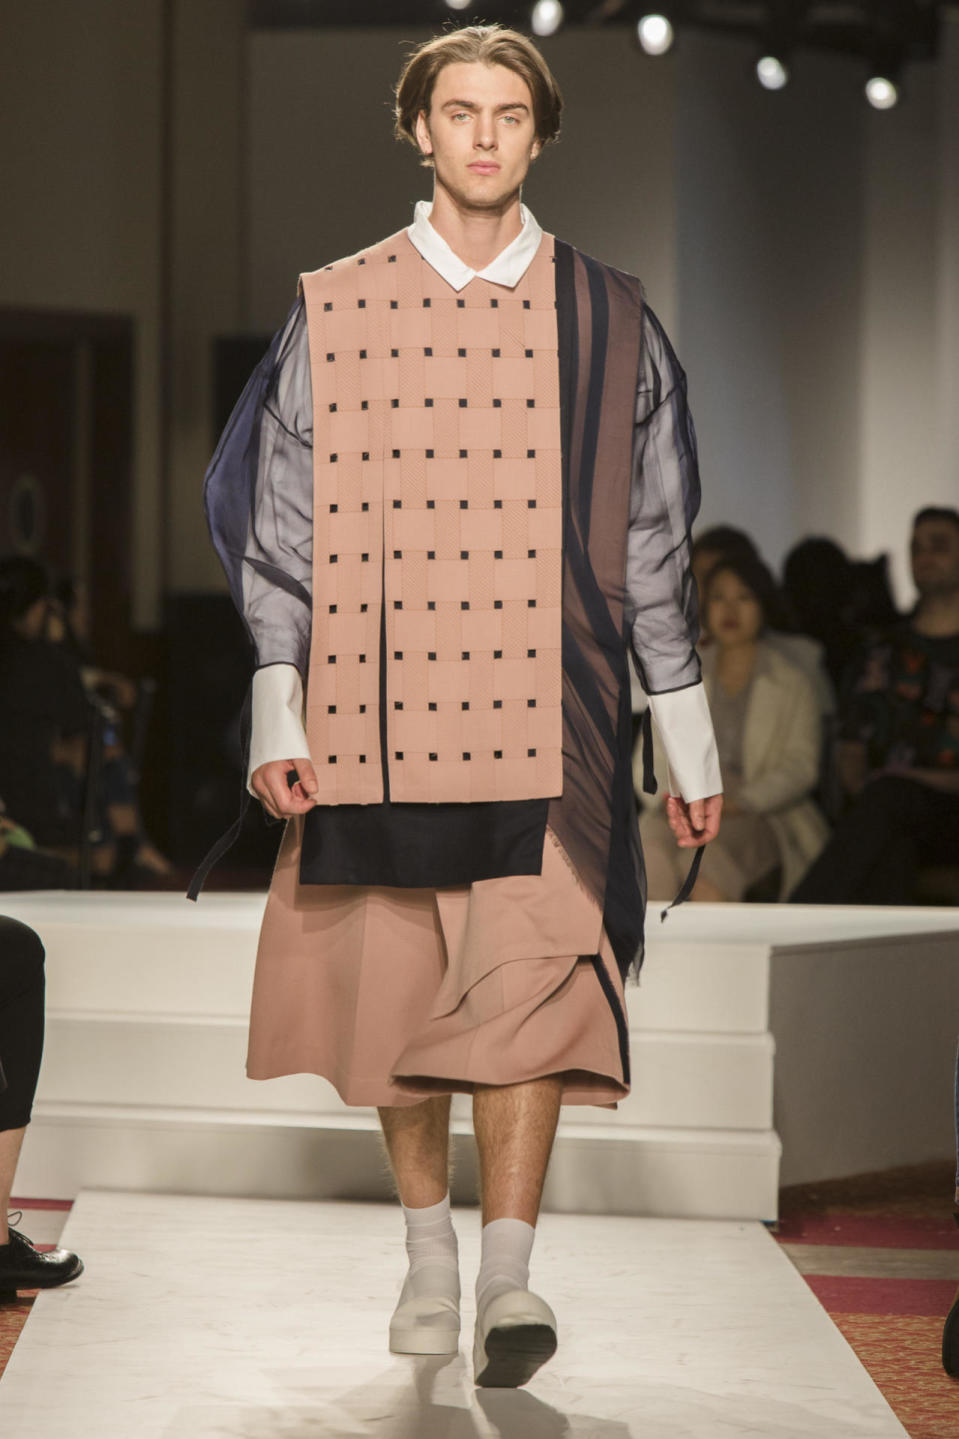 Parsons graduate Moon Choi’s design made lovely use of woven, blush-pink fabric with deep navy chiffon accents.